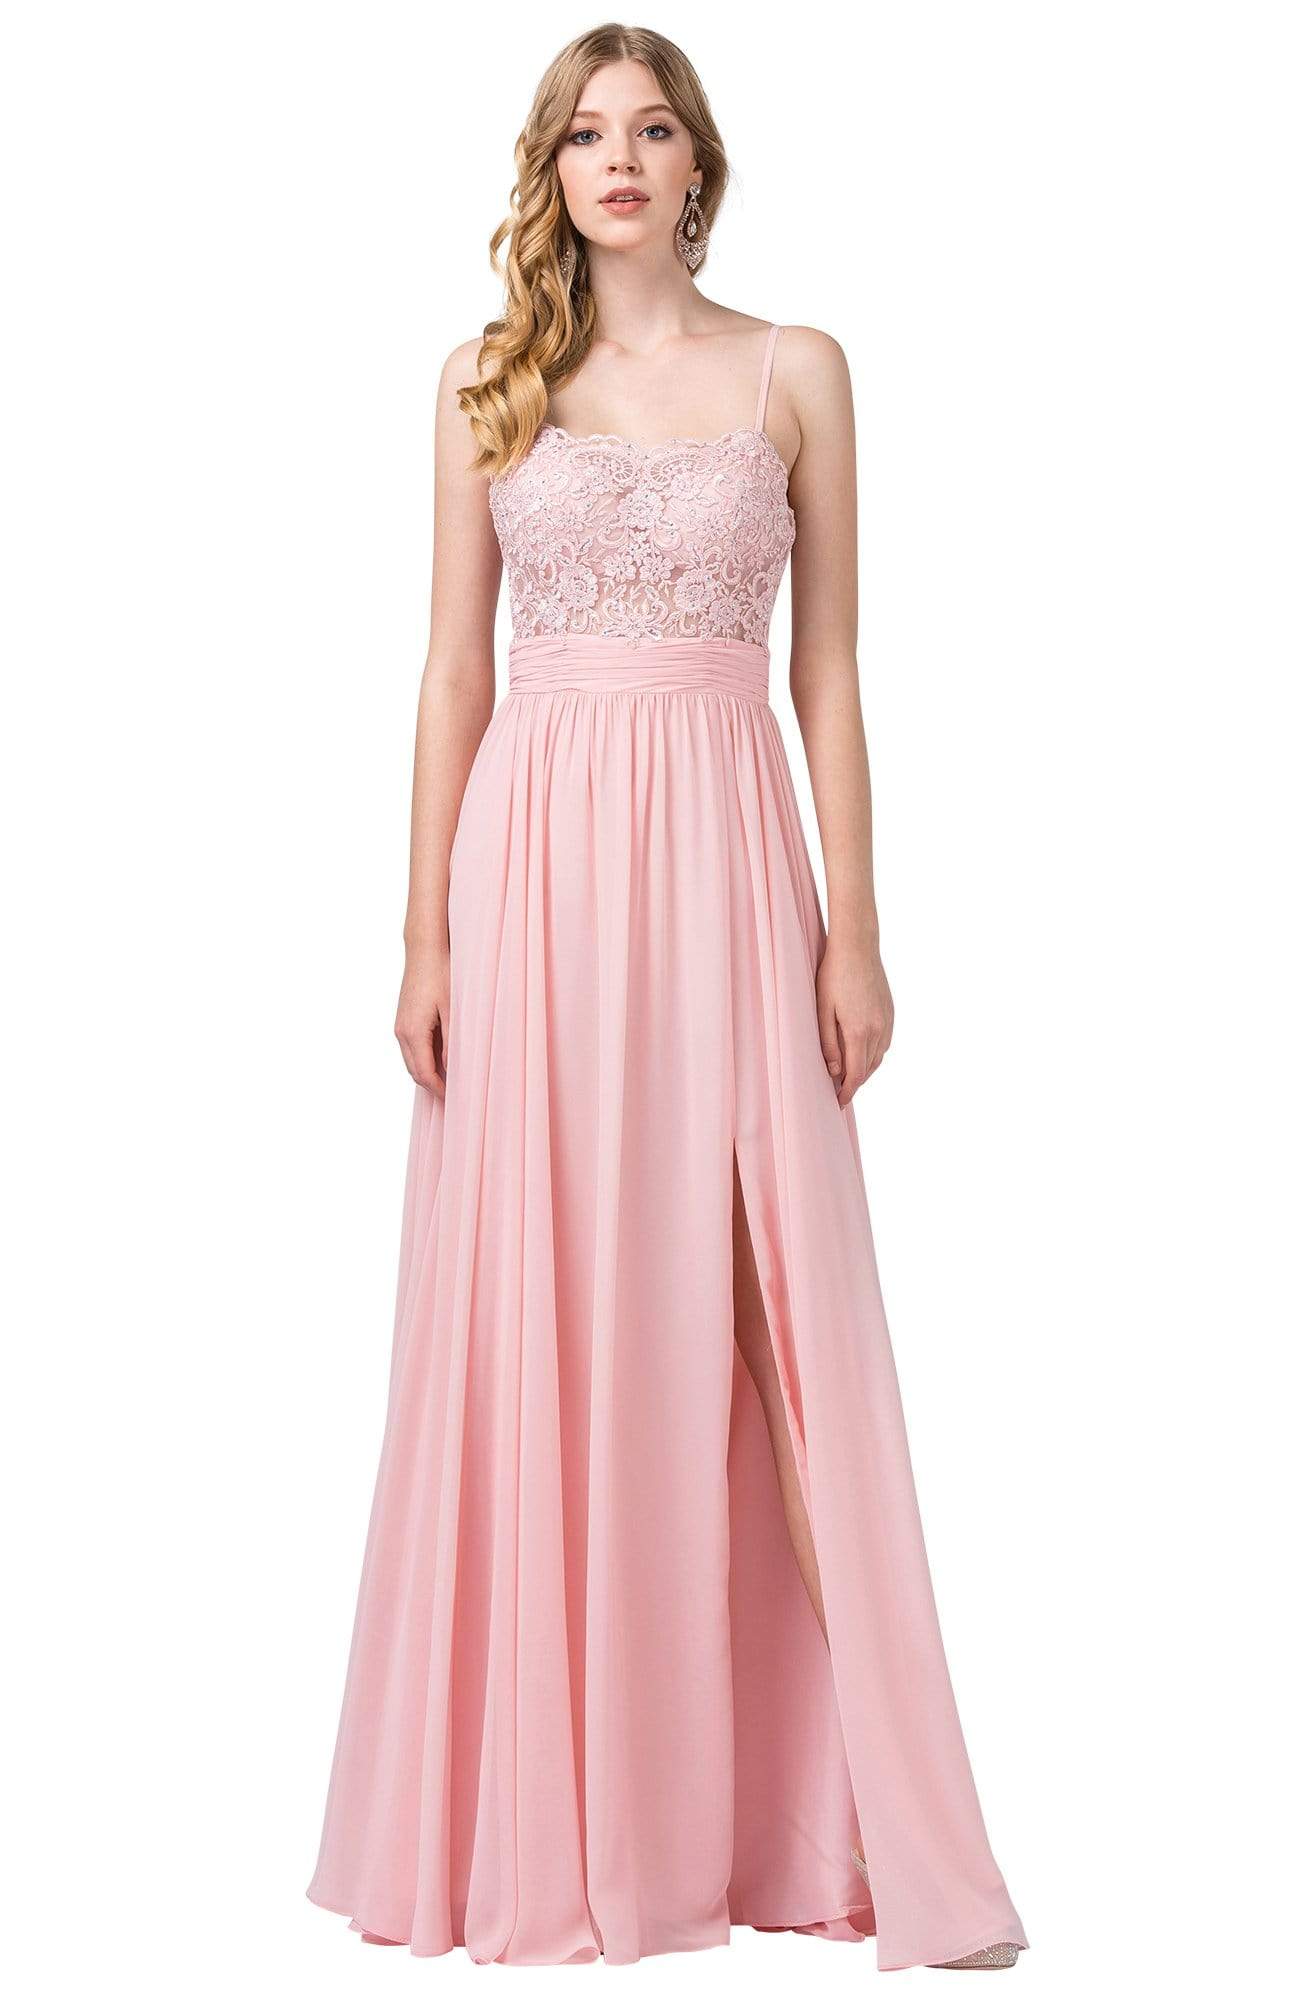 Image of Dancing Queen - 2789 Beaded Lace Embroidery Square Neck A-Line Gown